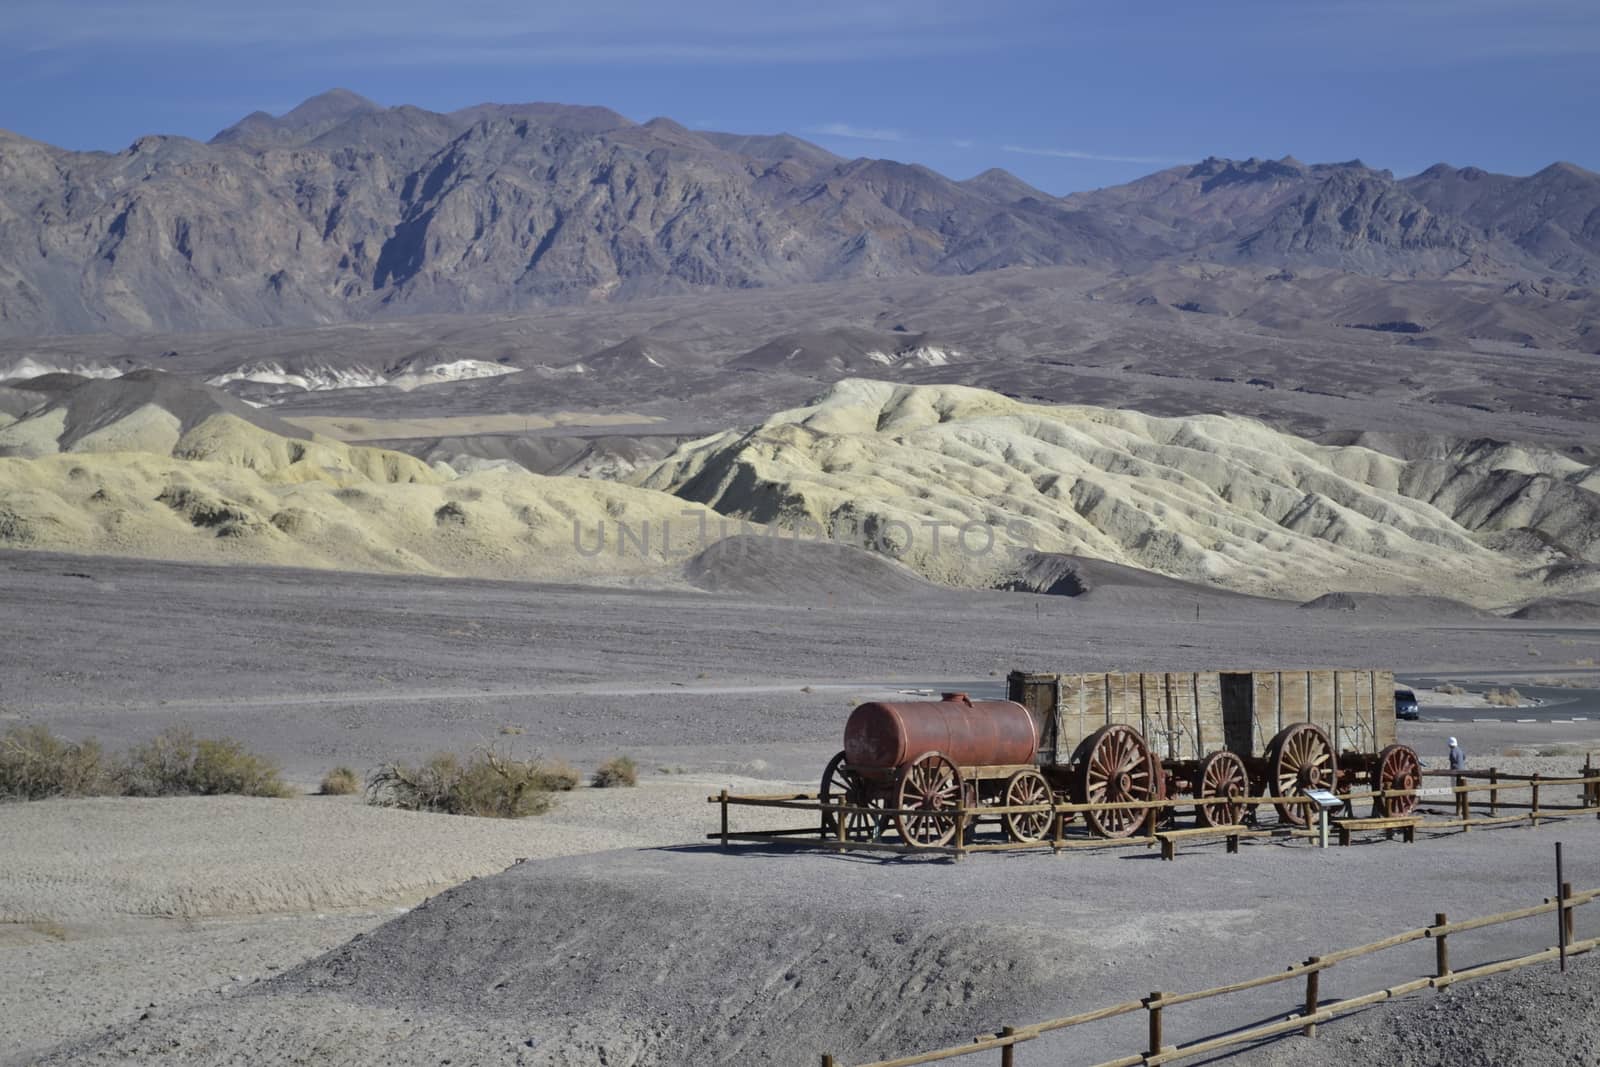 Wooden train used for transporting minerals in and out of the Death Valley